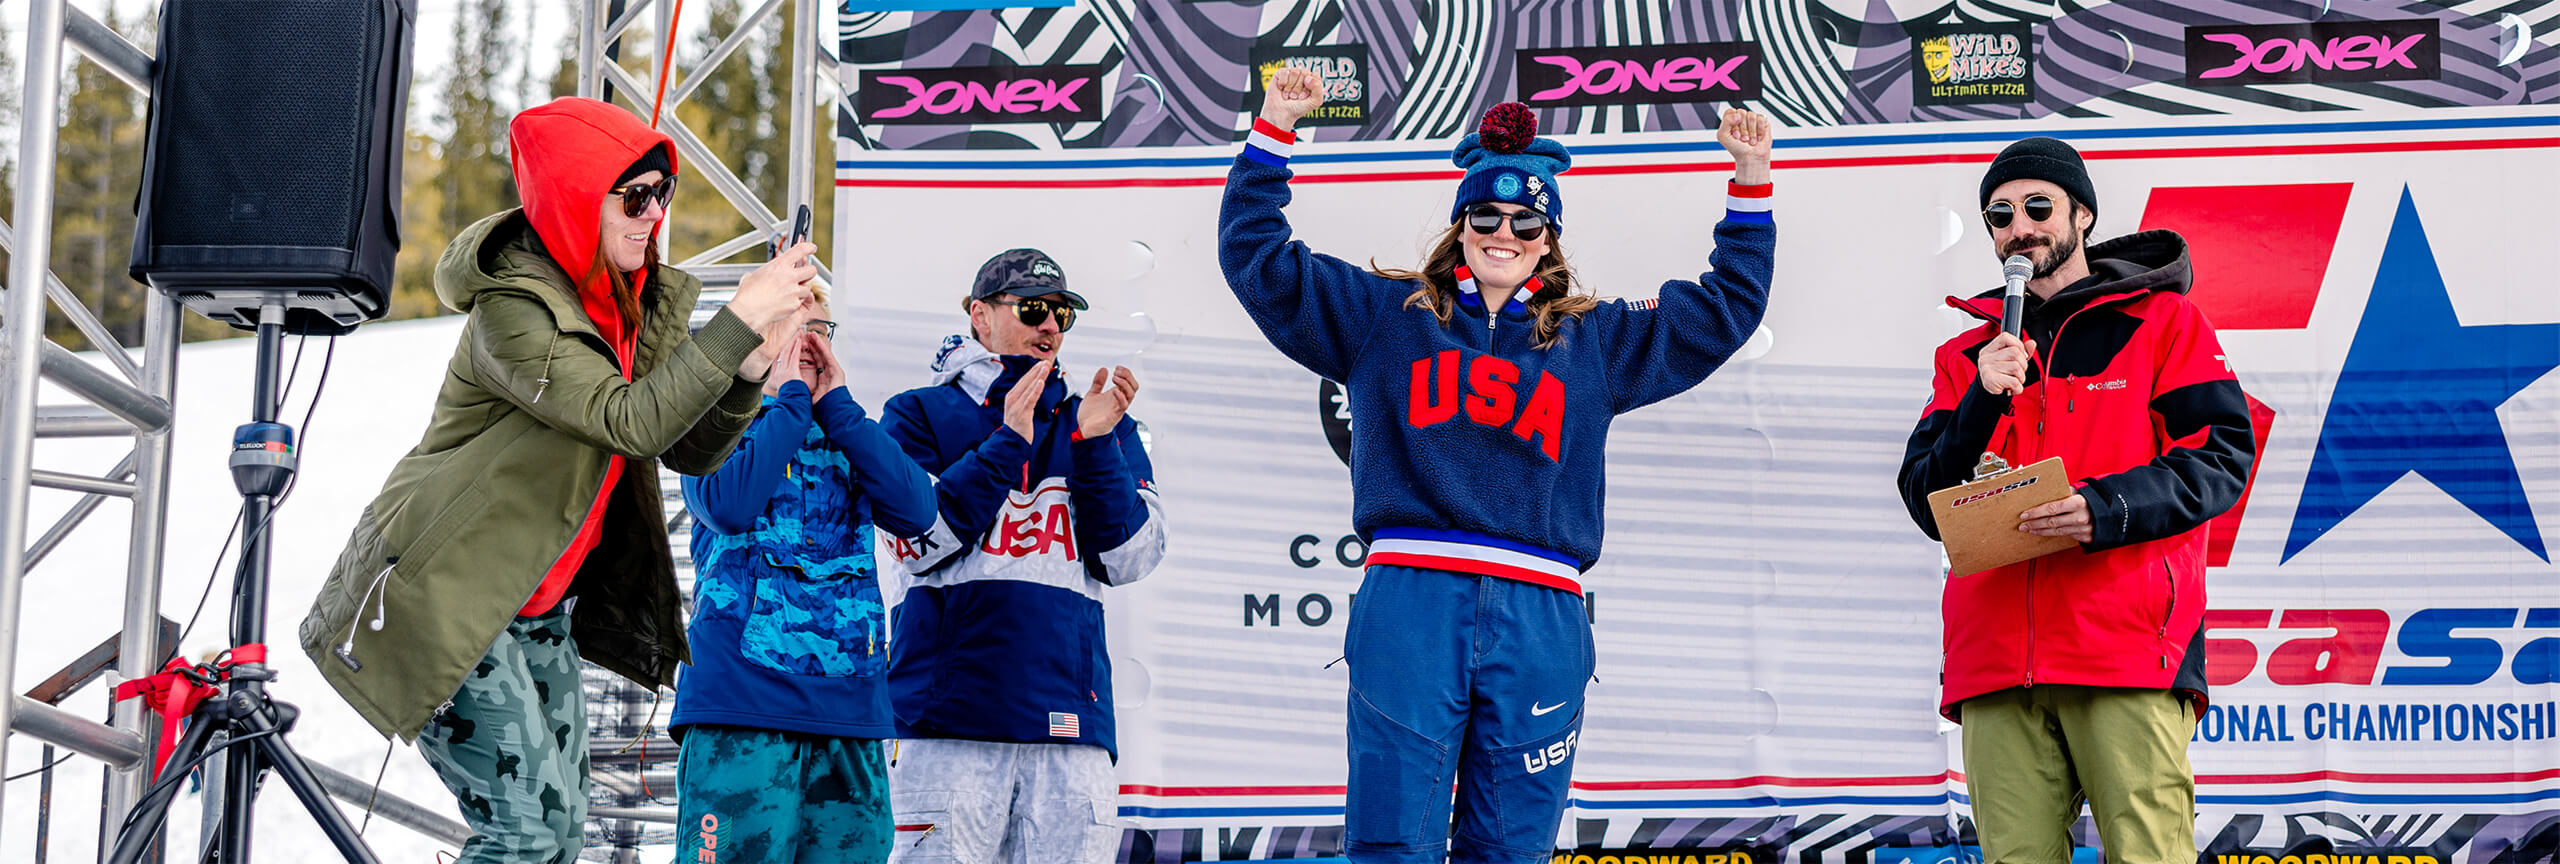 Girl on stage in USA shirt at USASA National Championships at Copper